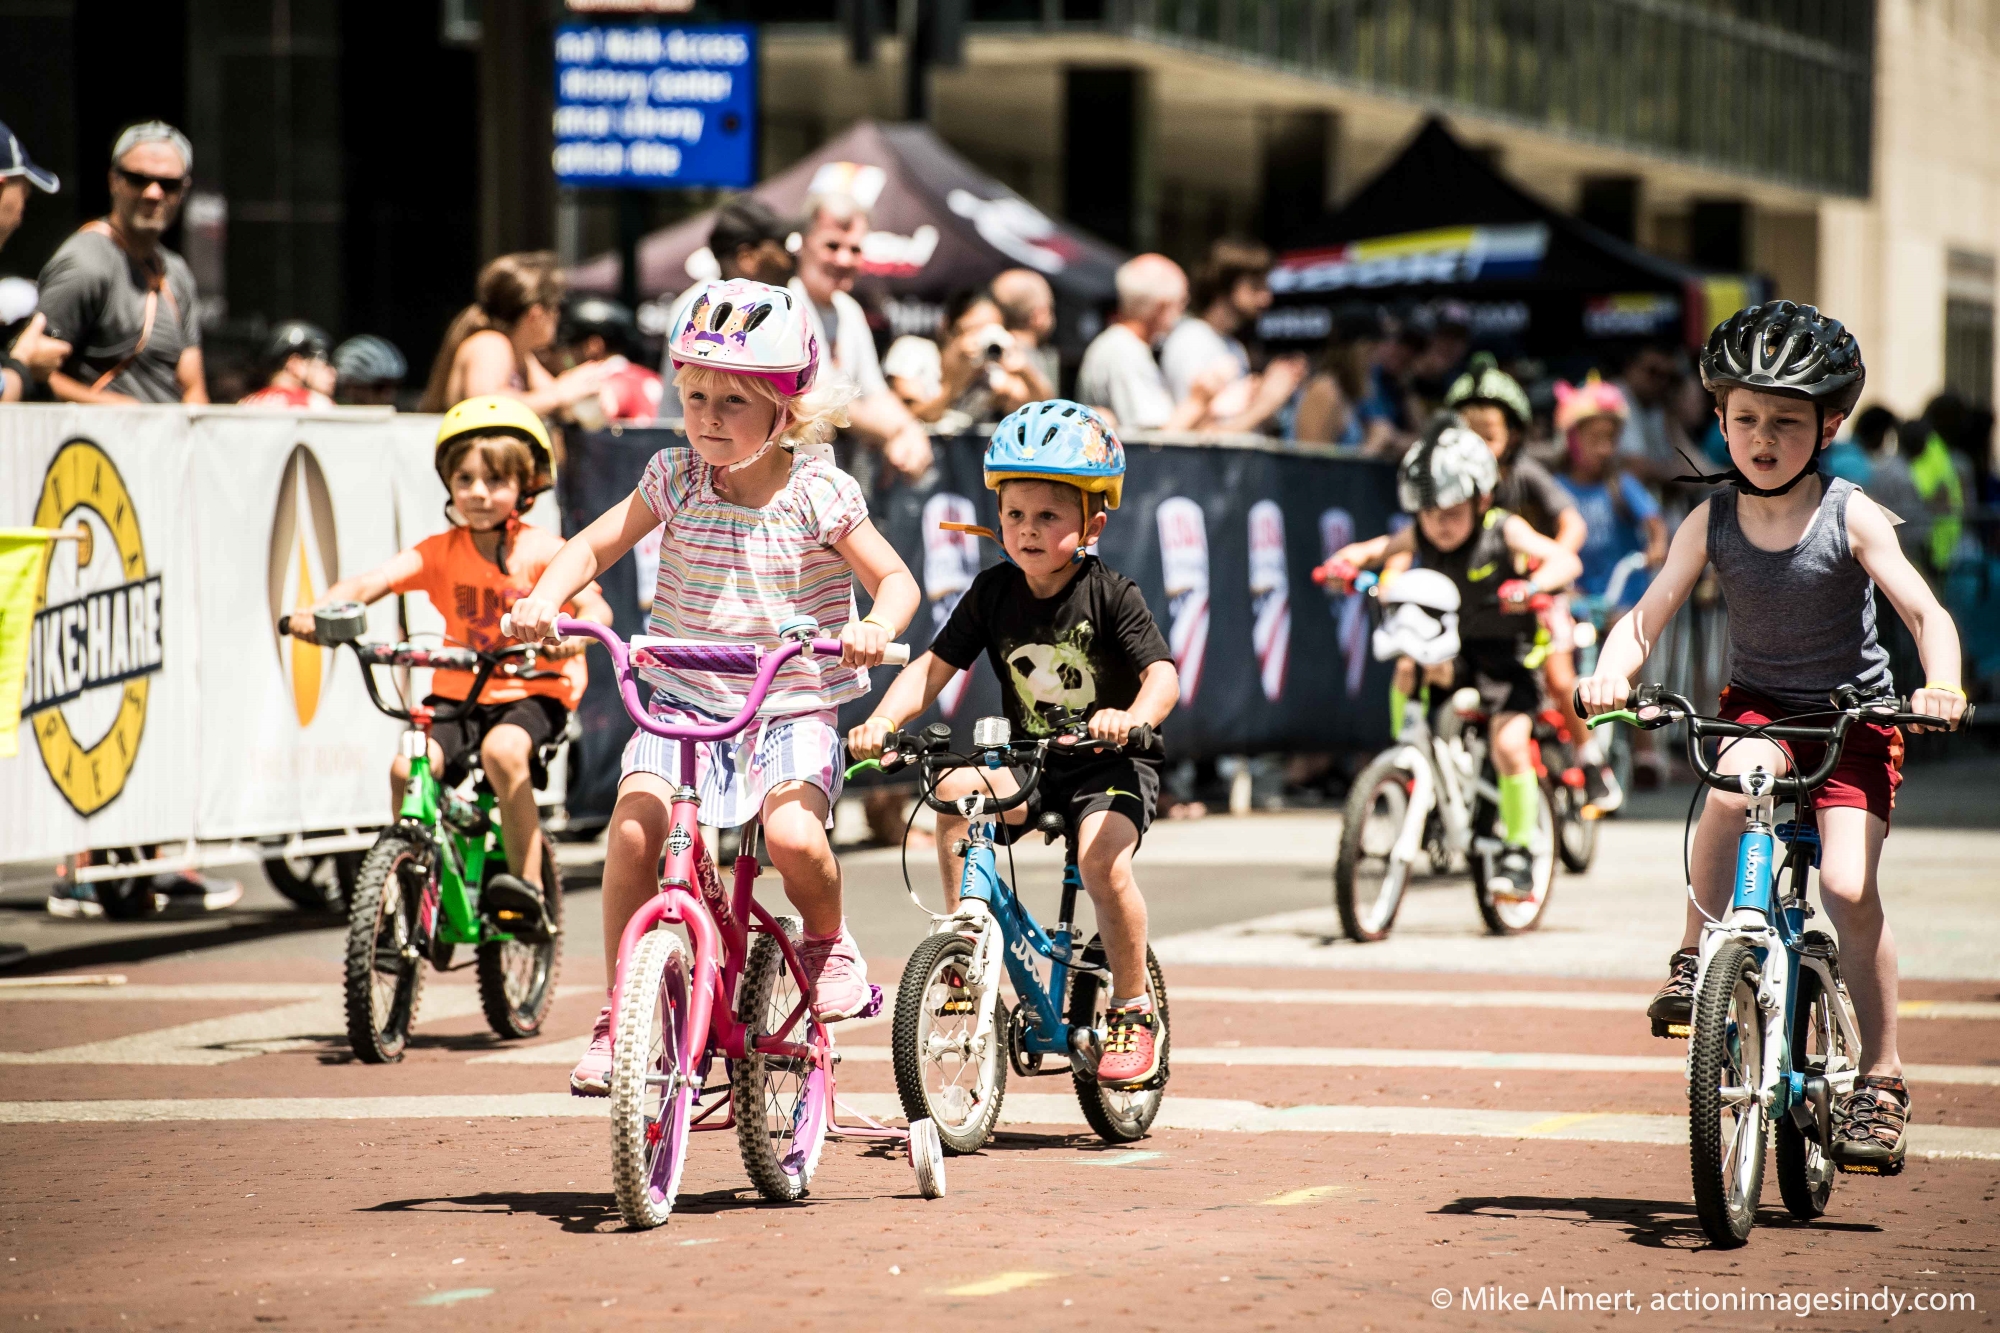 A childs bike race at Momentum Indy